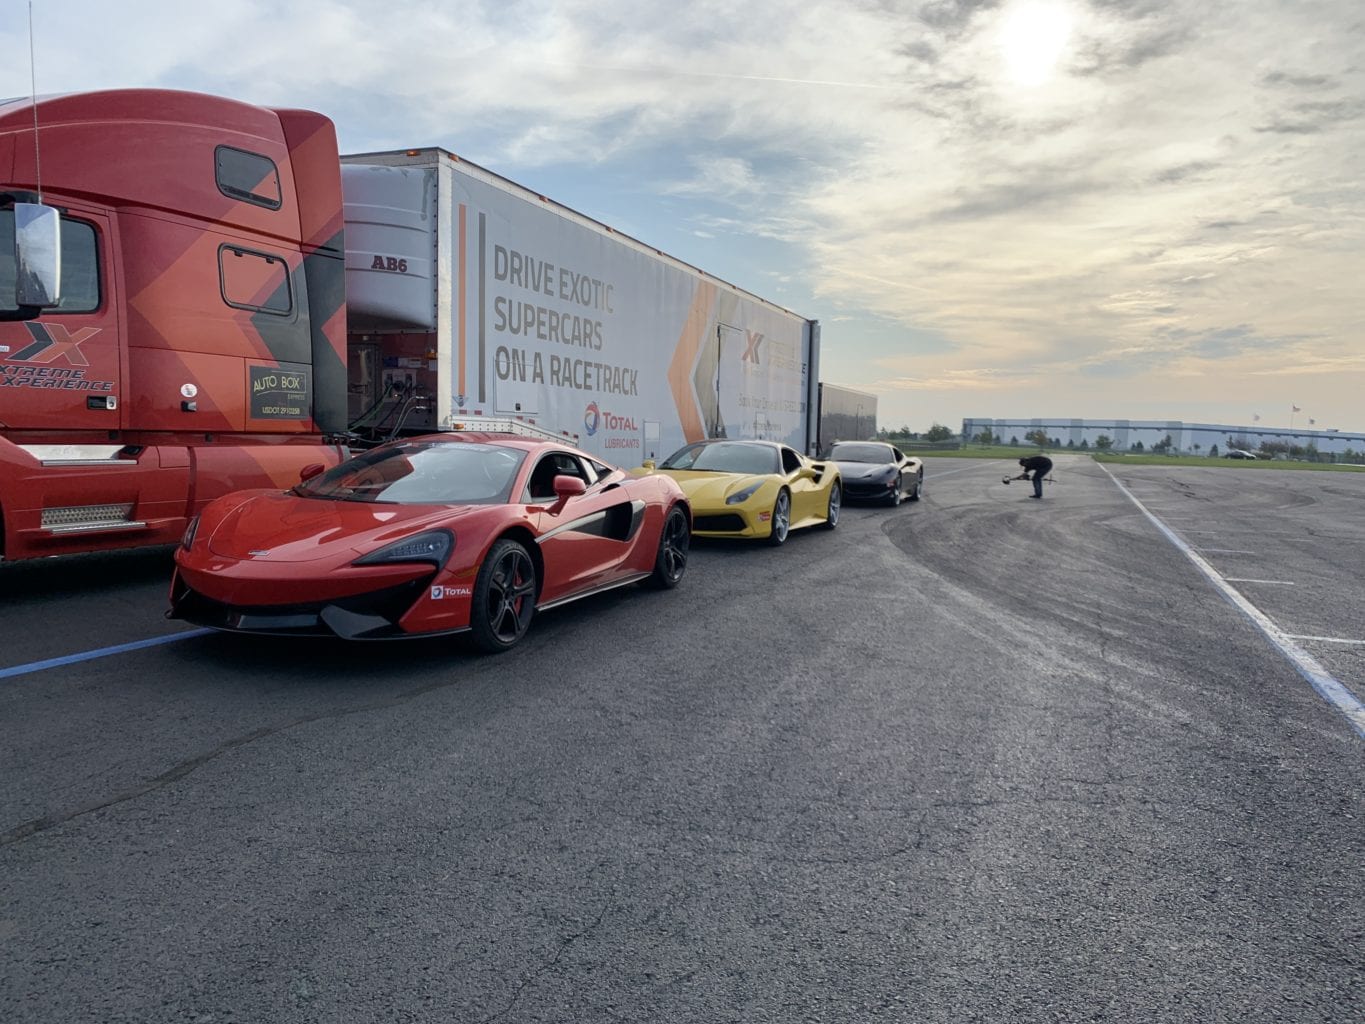 Supercars arriving at a racetrack